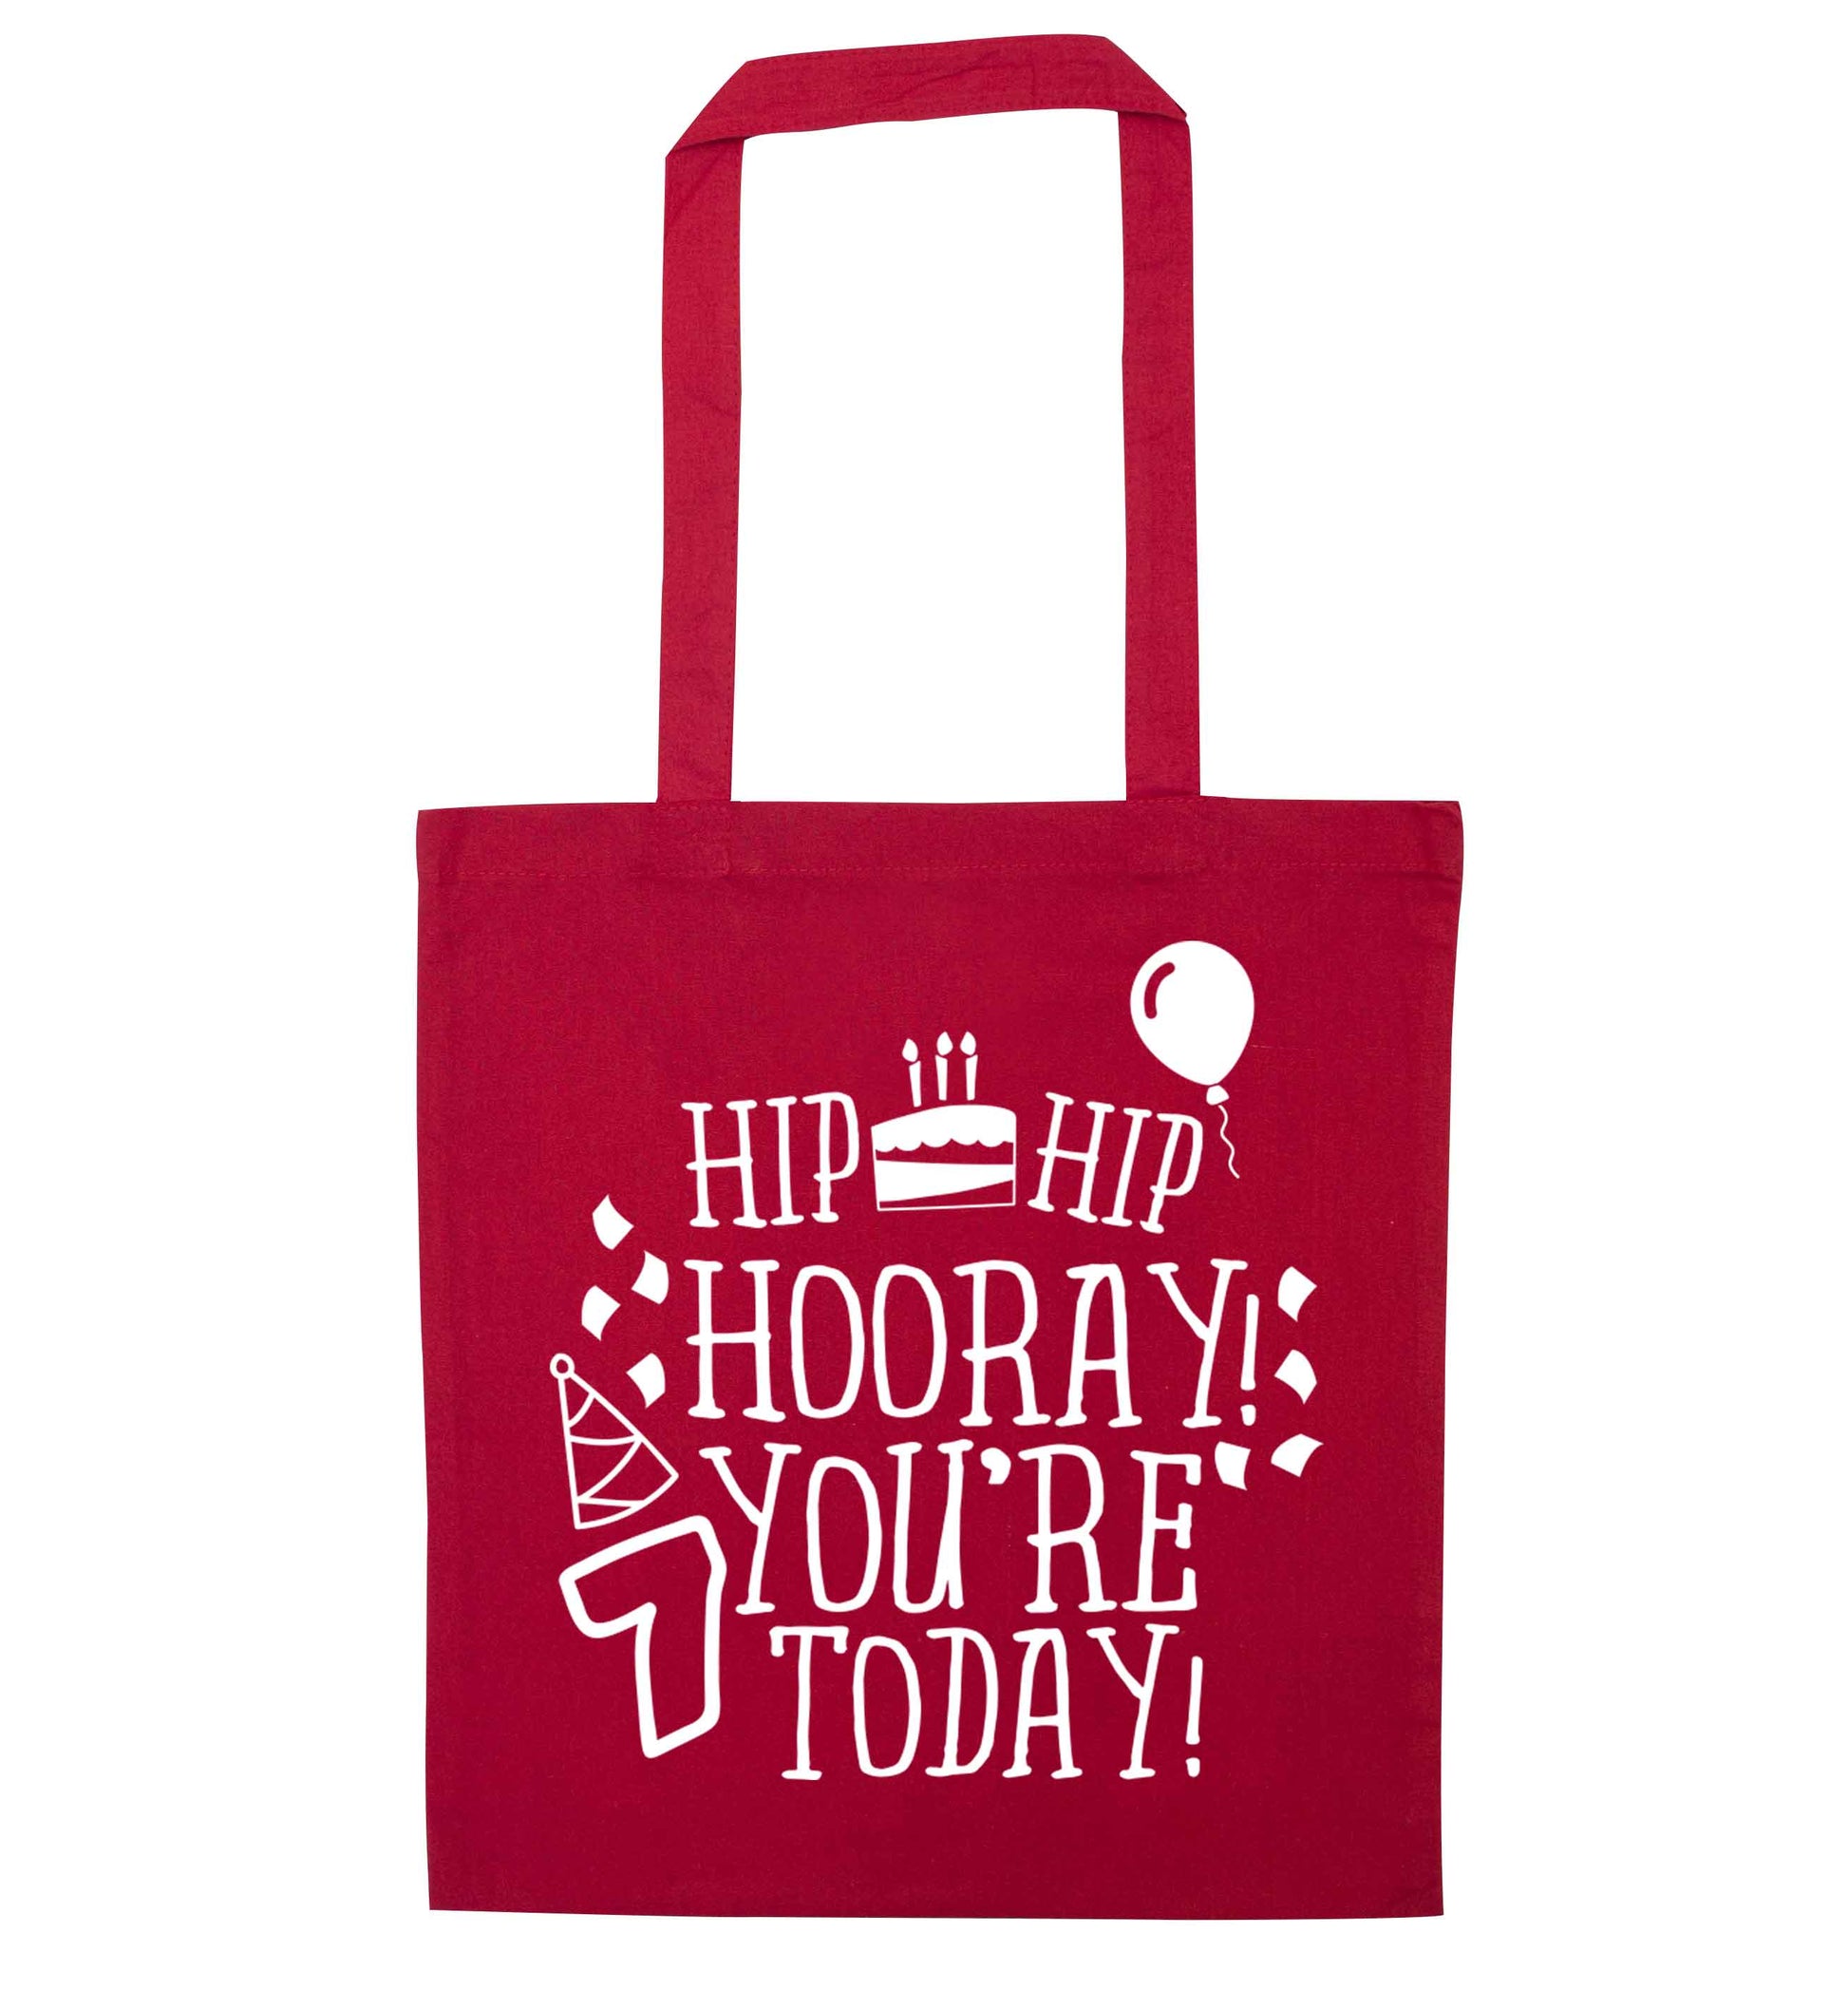 Hip hip hooray you're seven today! red tote bag